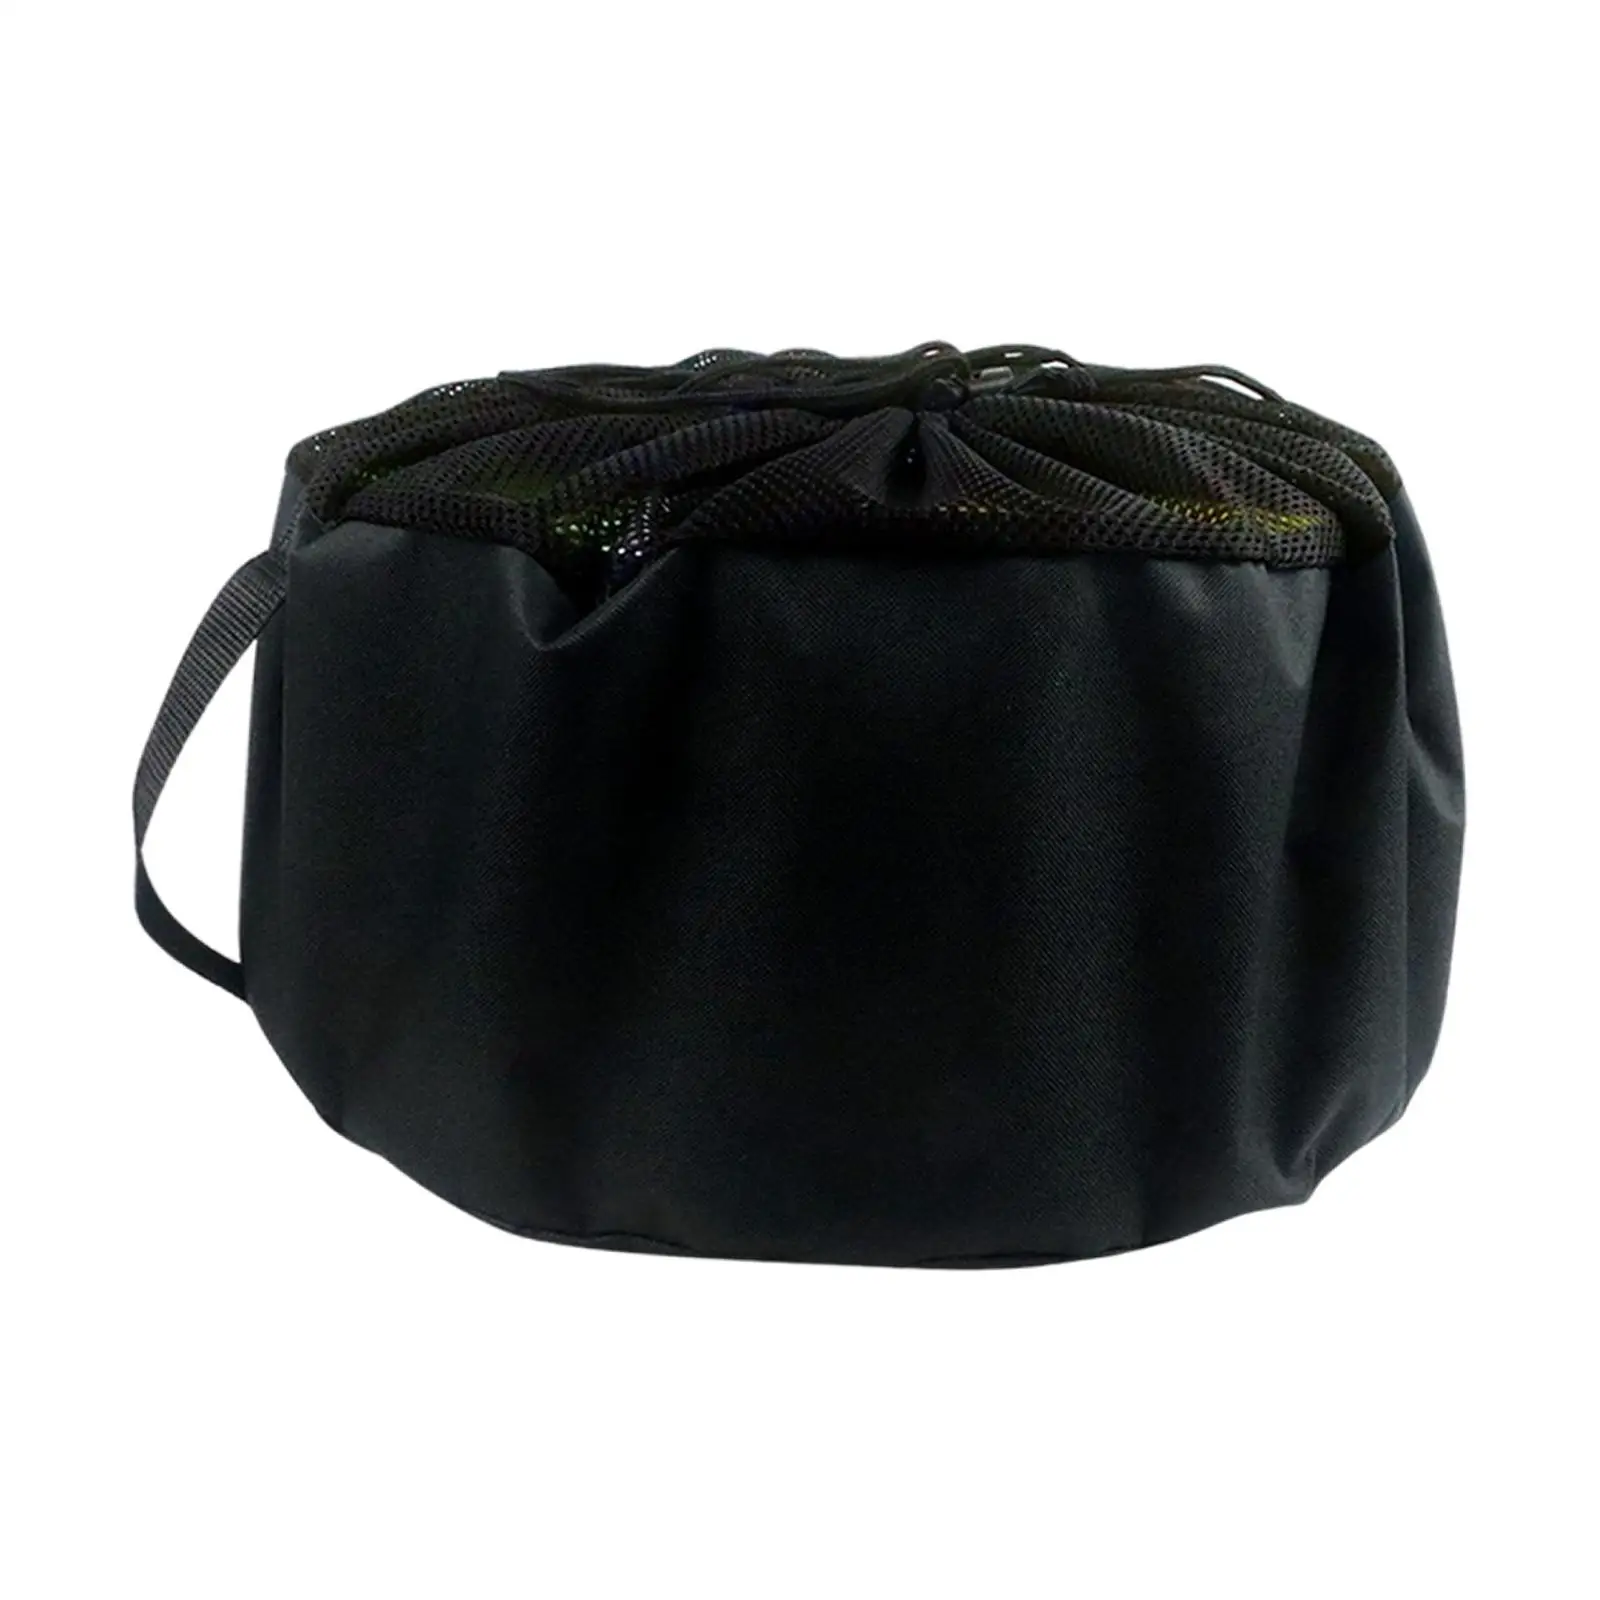 Water Hose Bag, with Carry Handle Large Capacity for Water Hoses Gardening Equipment